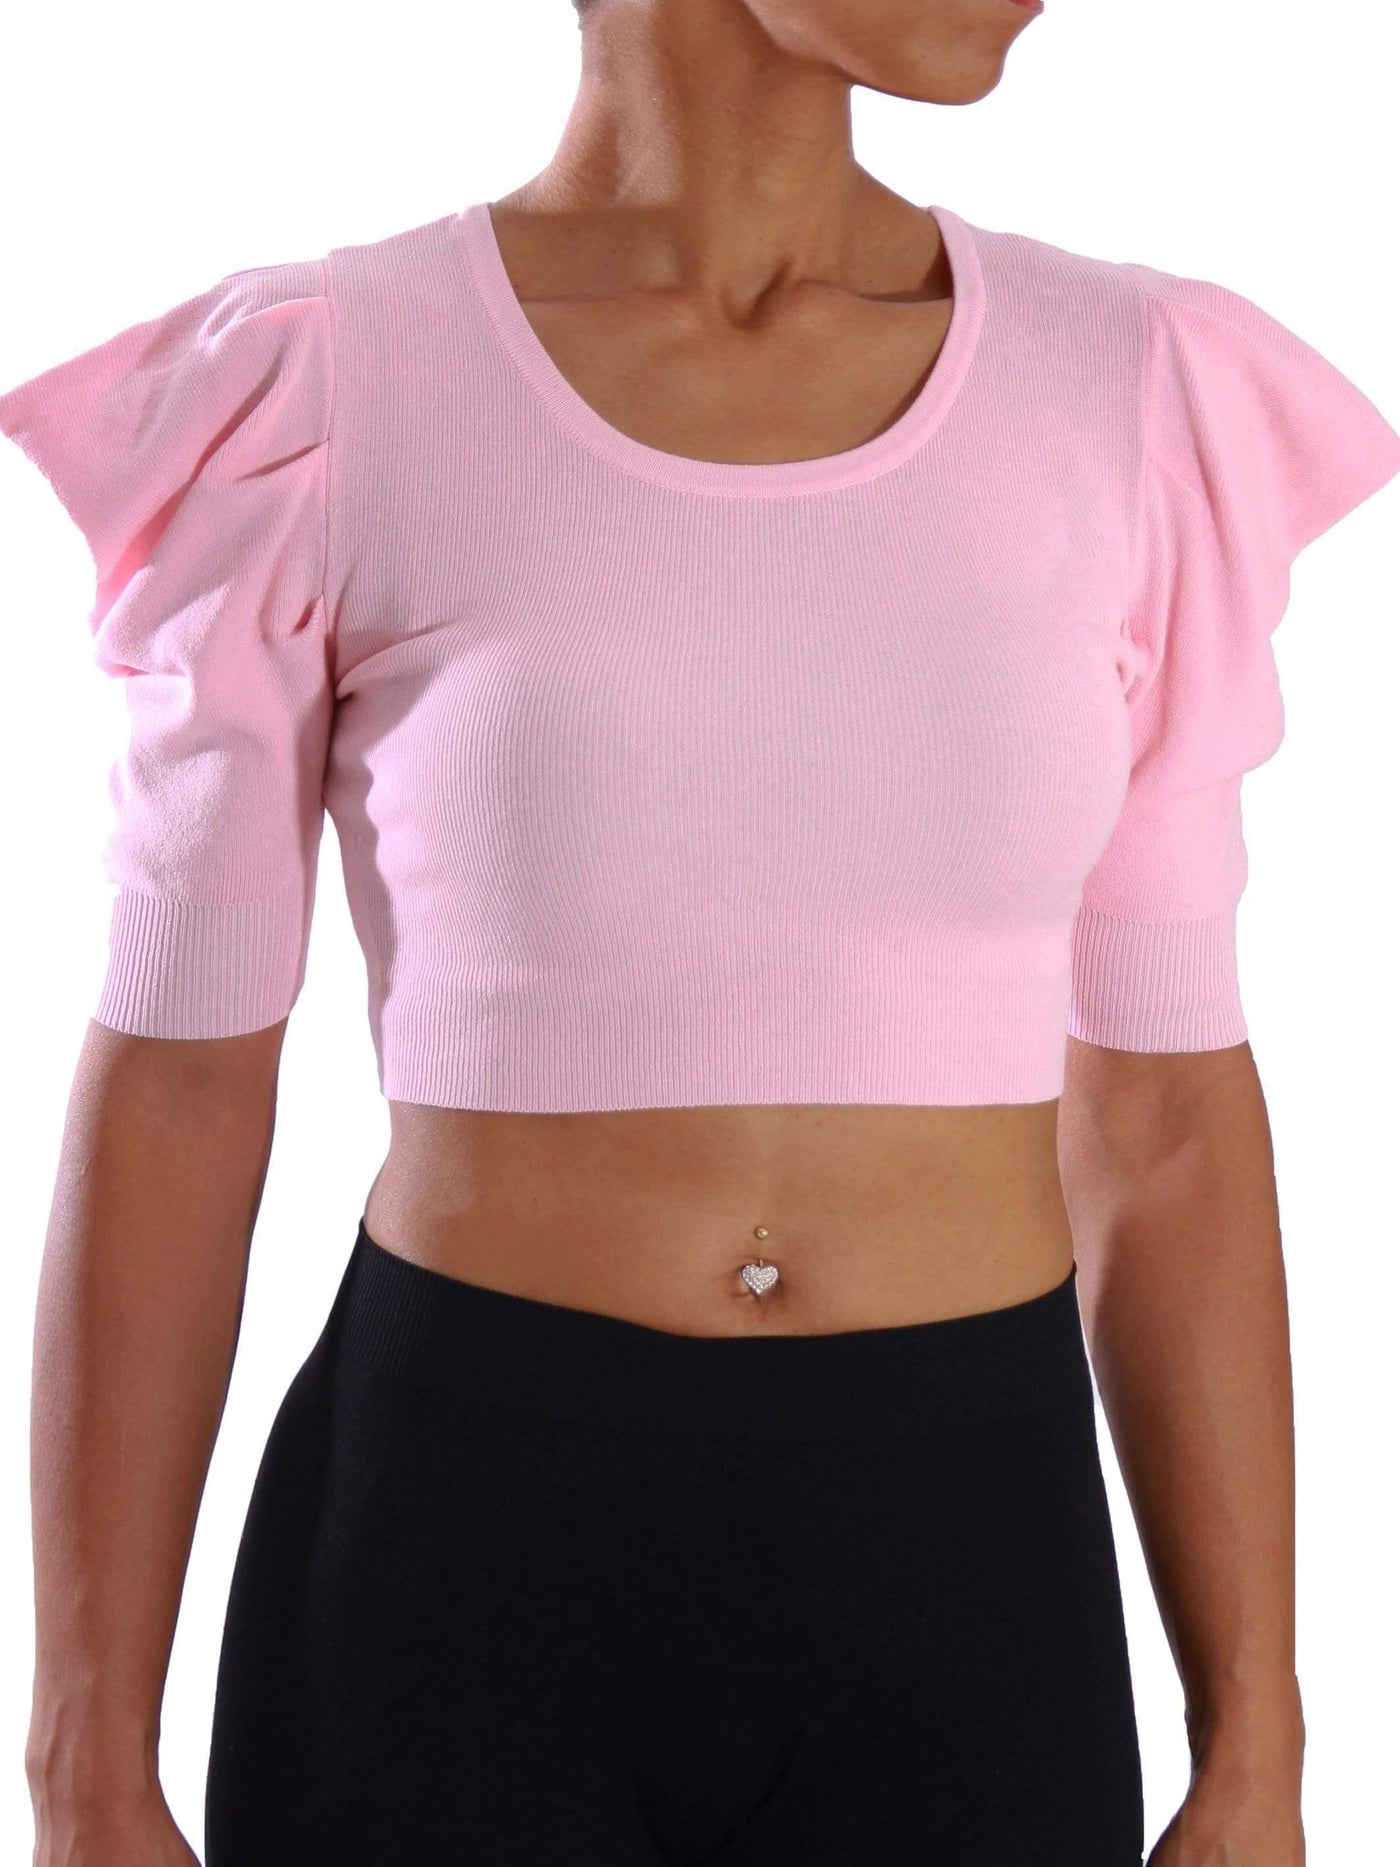 Urban Batwing | Puff Sleeve Knit Crop Top - Statement Piece NY _tab_final-sale, _tab_size-chart, balloon sleeves, Blossom 2021, Brooklyn Boutique, Colorful, Crop Top, Fall, final, final sale, Half Sleeve, knit top, Misses, not clearance, Pink, puff sleeves, Ships from USA, SPNY Exclusive, Standard Fall, Statement Clothing, Statement Piece Boutique, statement piece ny, Statement Pieces, Statement Pieces Boutique, statement tops, Sweater, Tops, urban batwing, Women's Boutique Shirts & Tops